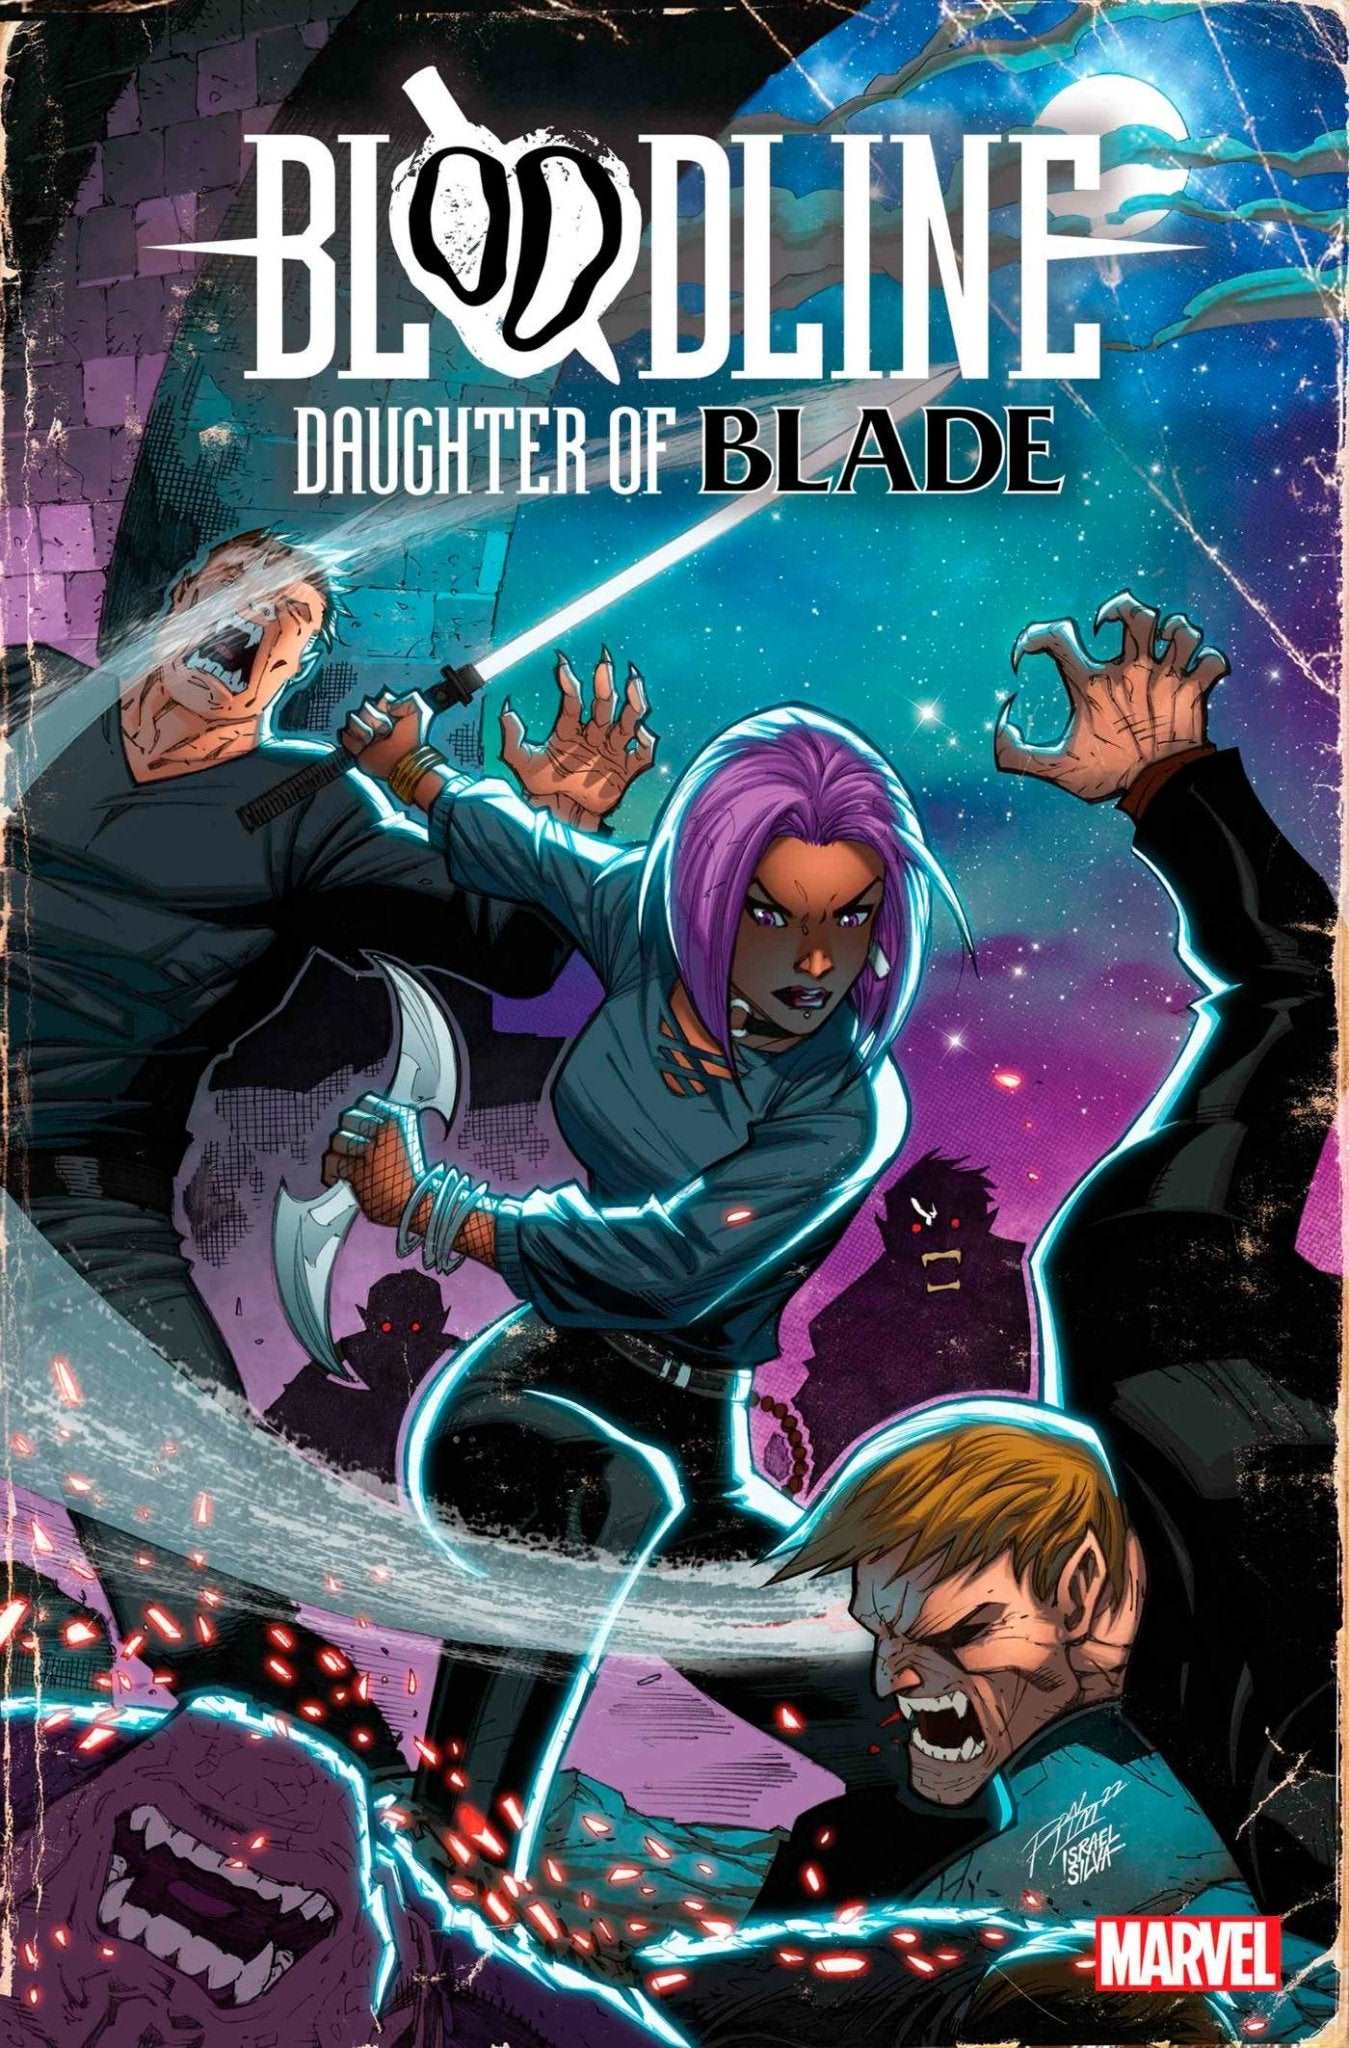 BLOODLINE DAUGHTER OF BLADE #1 RON LIM VAR - The Comic Construct